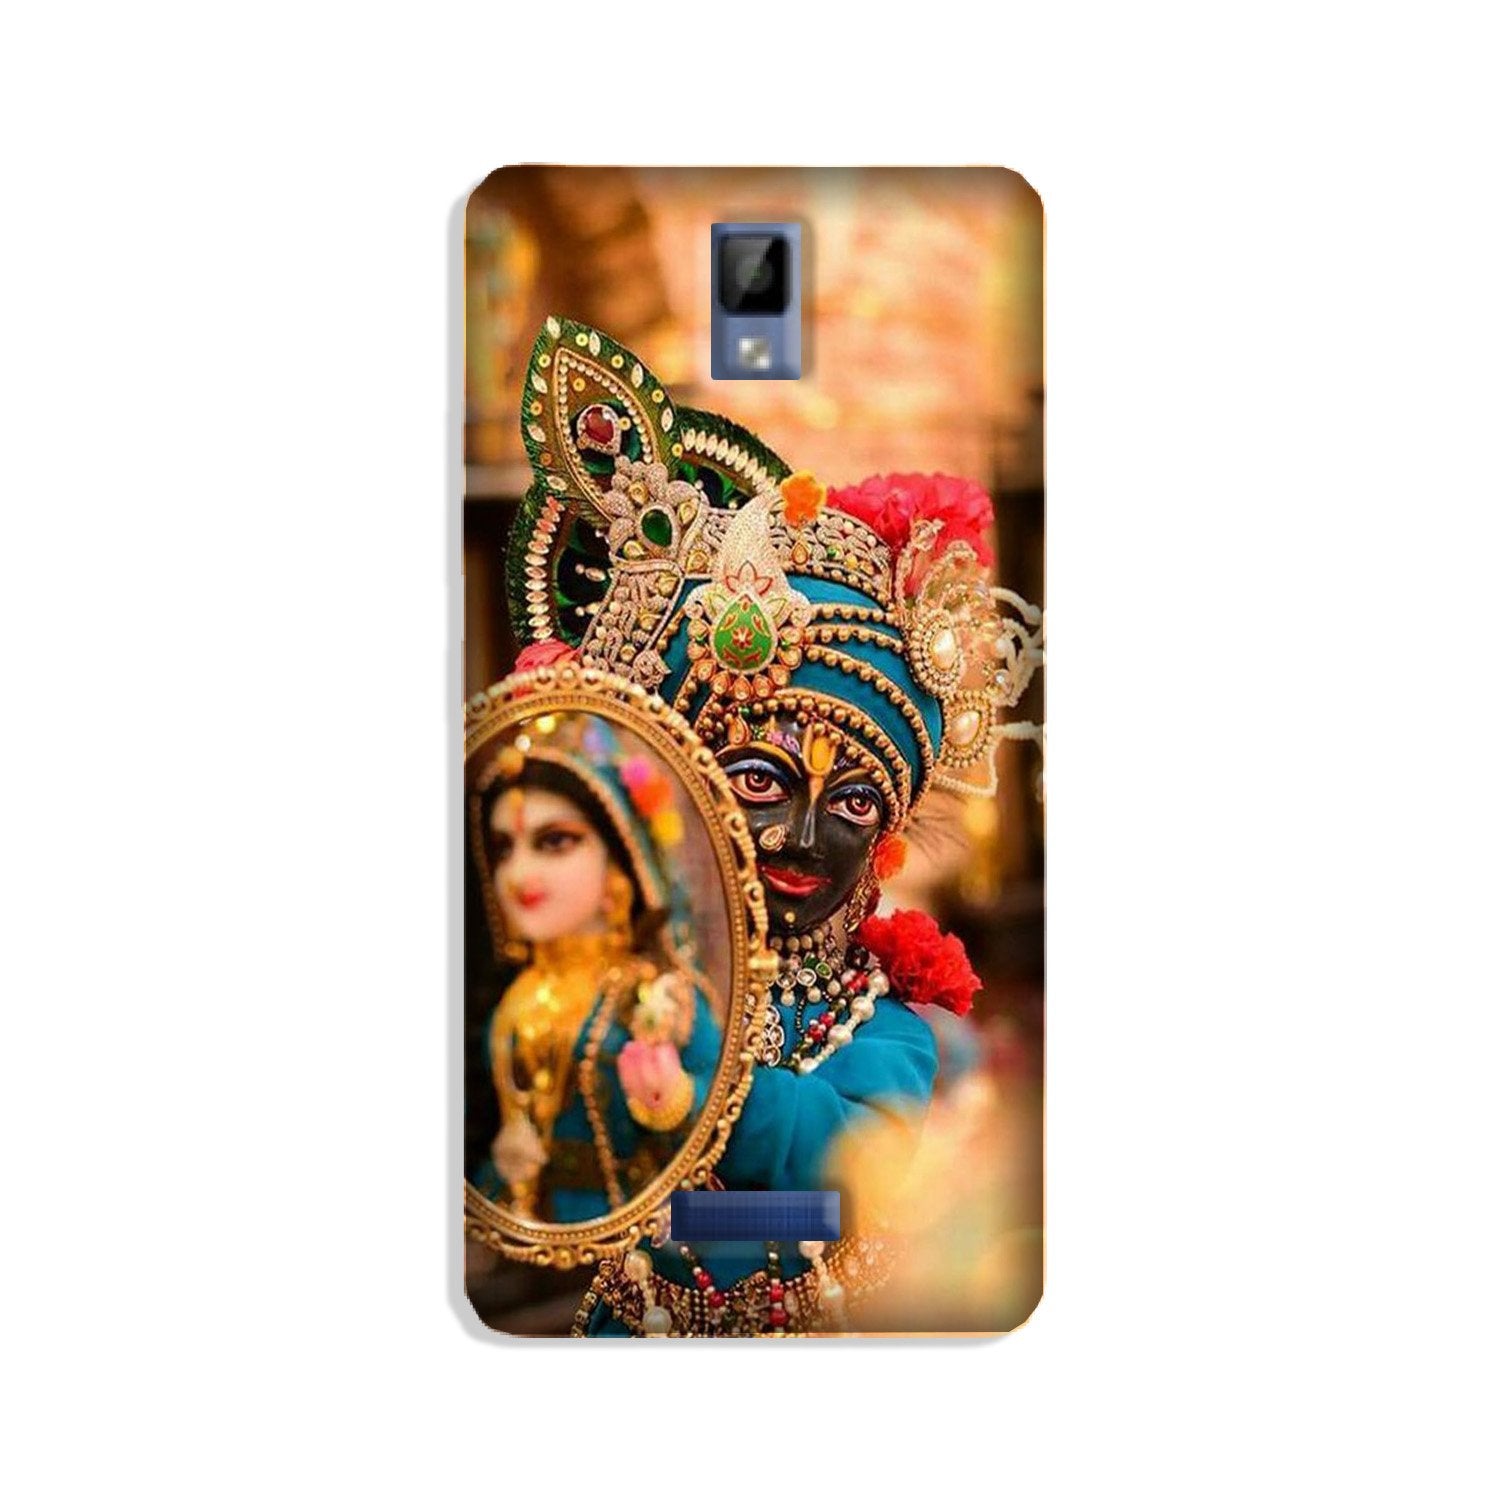 Lord Krishna5 Case for Gionee P7